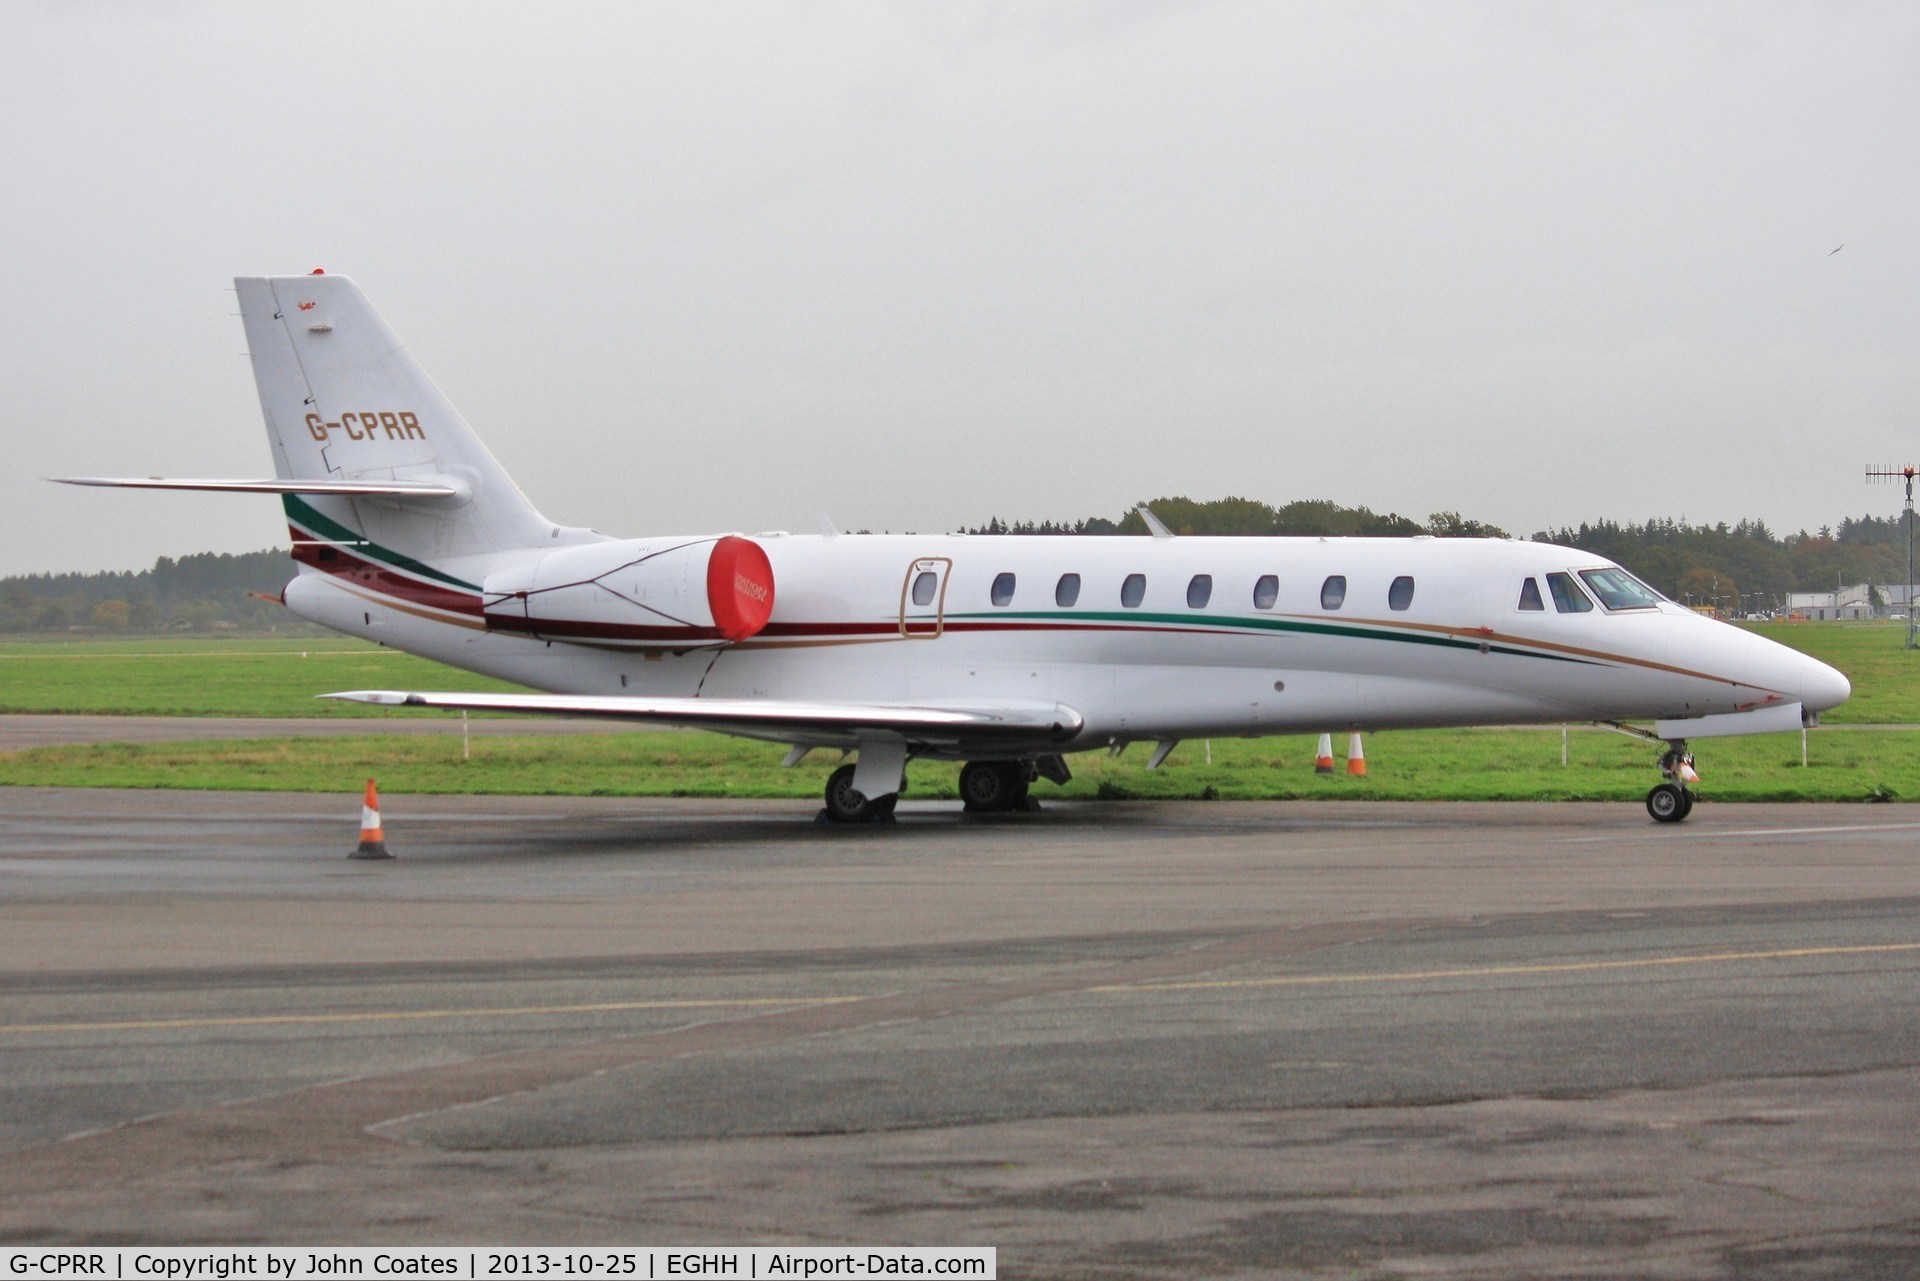 G-CPRR, 2009 Cessna 680 Citation Sovereign C/N 680-0276, Parked at Signatures.